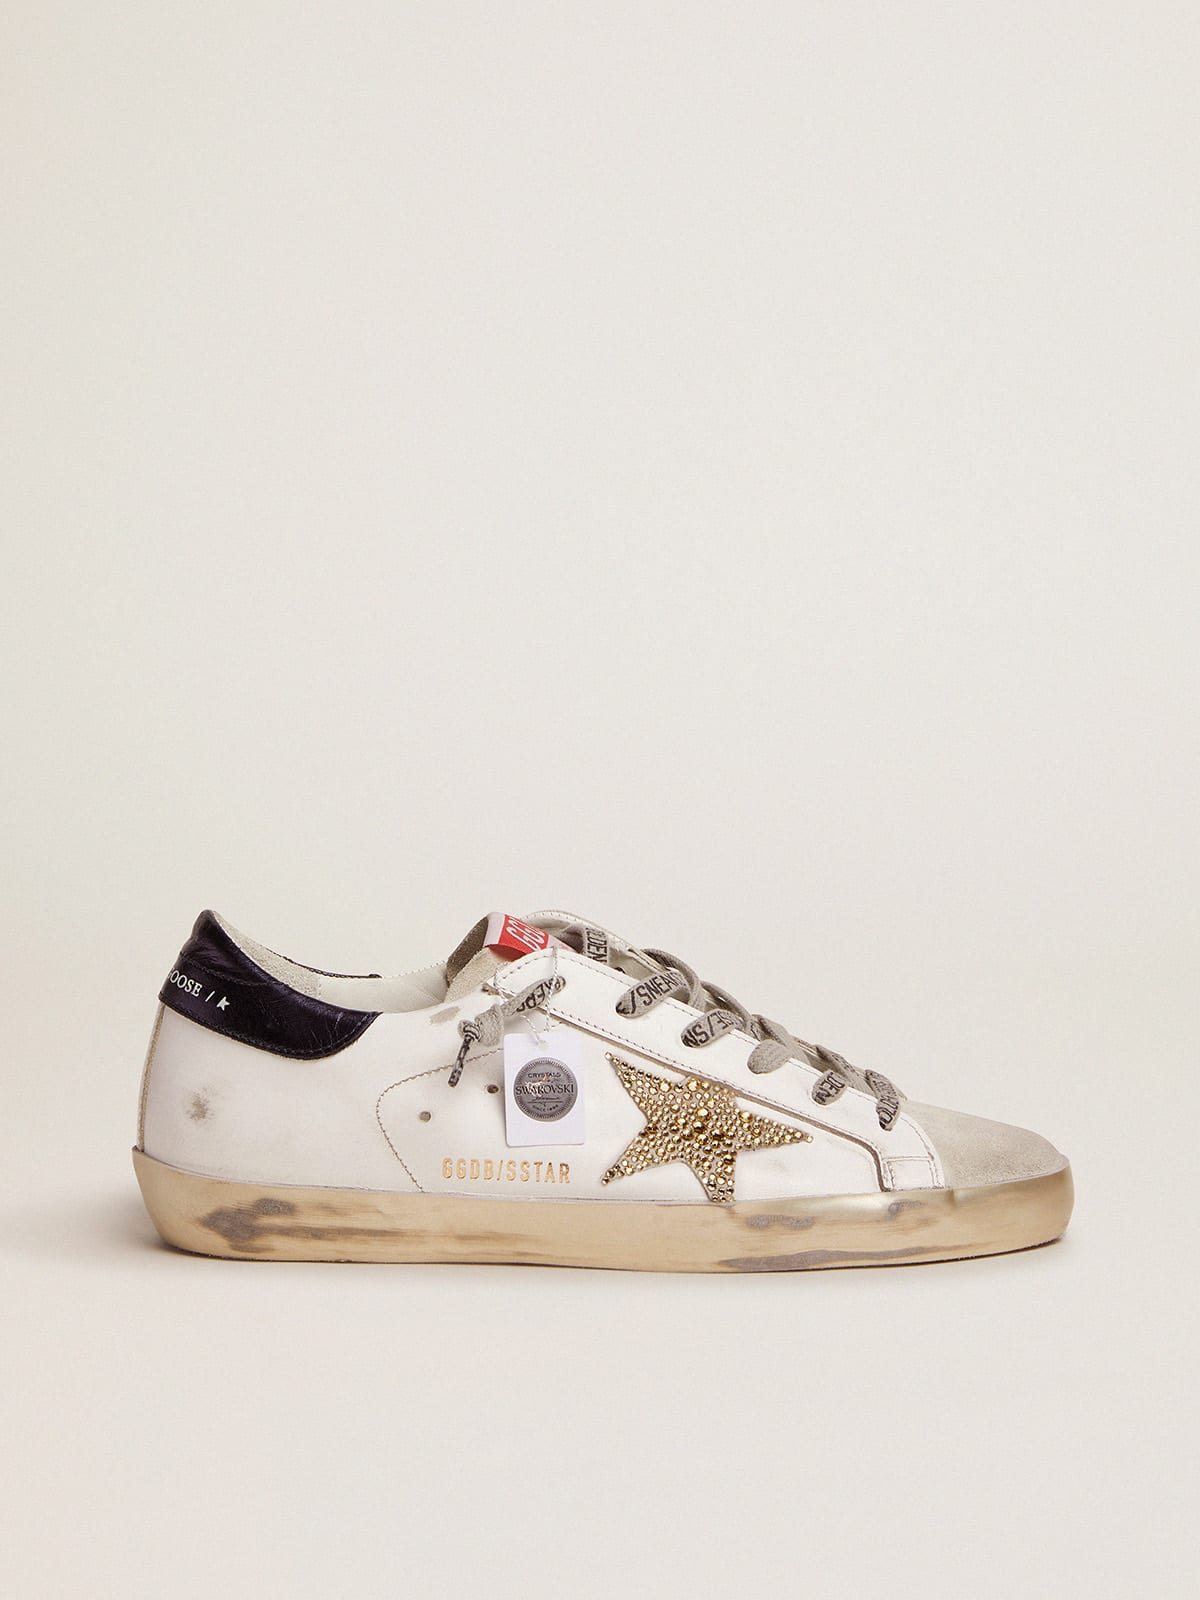 Golden Goose - Super-Star LTD sneakers with blue heel tab and Swarovski crystal star in 